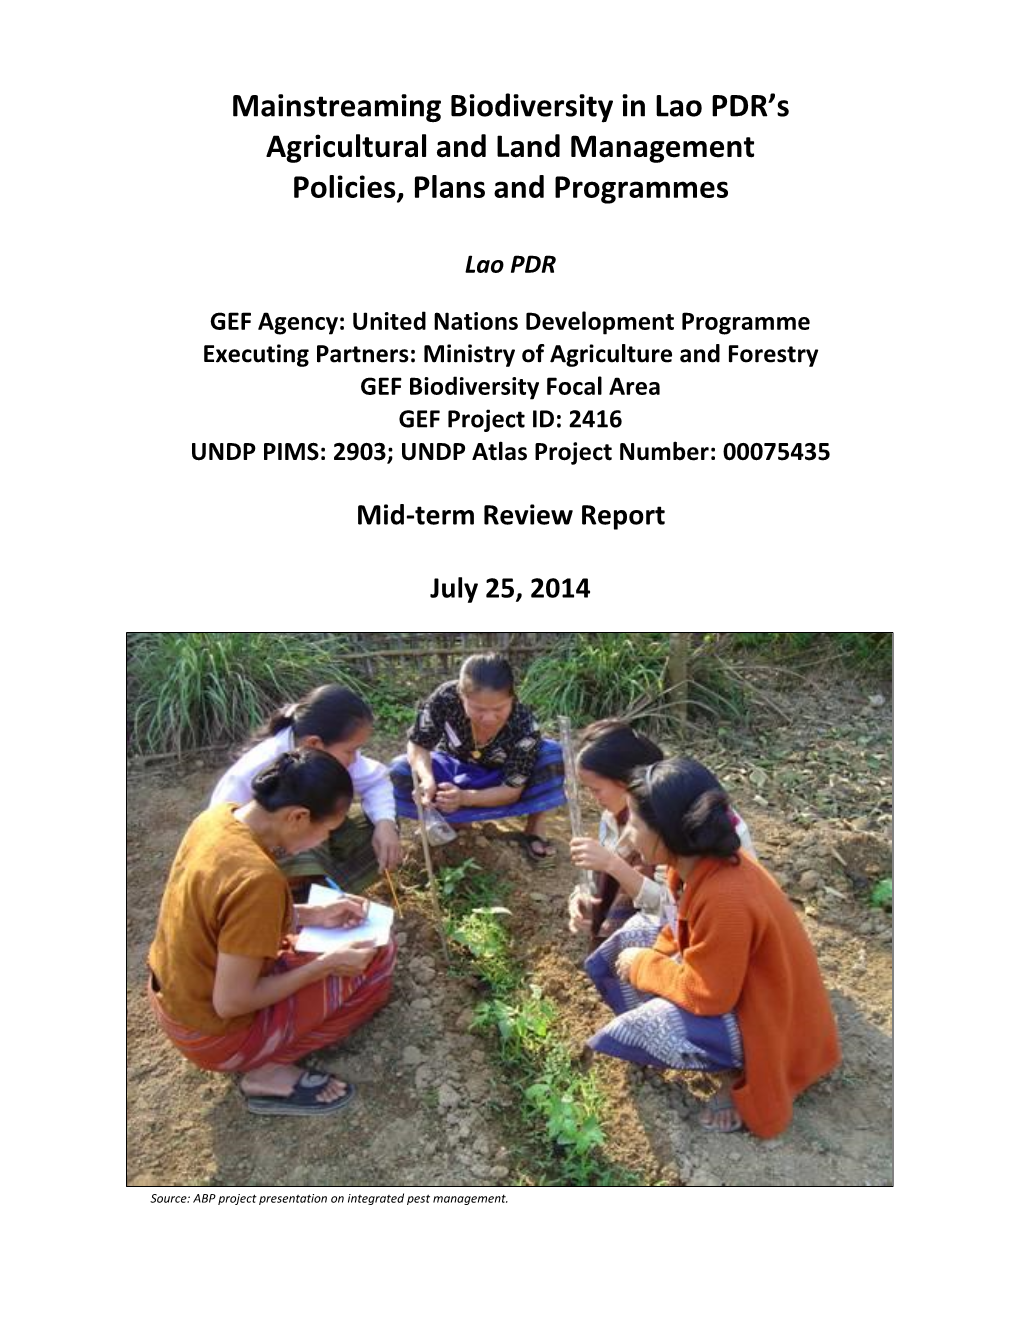 Mainstreaming Biodiversity in Lao PDR's Agricultural and Land